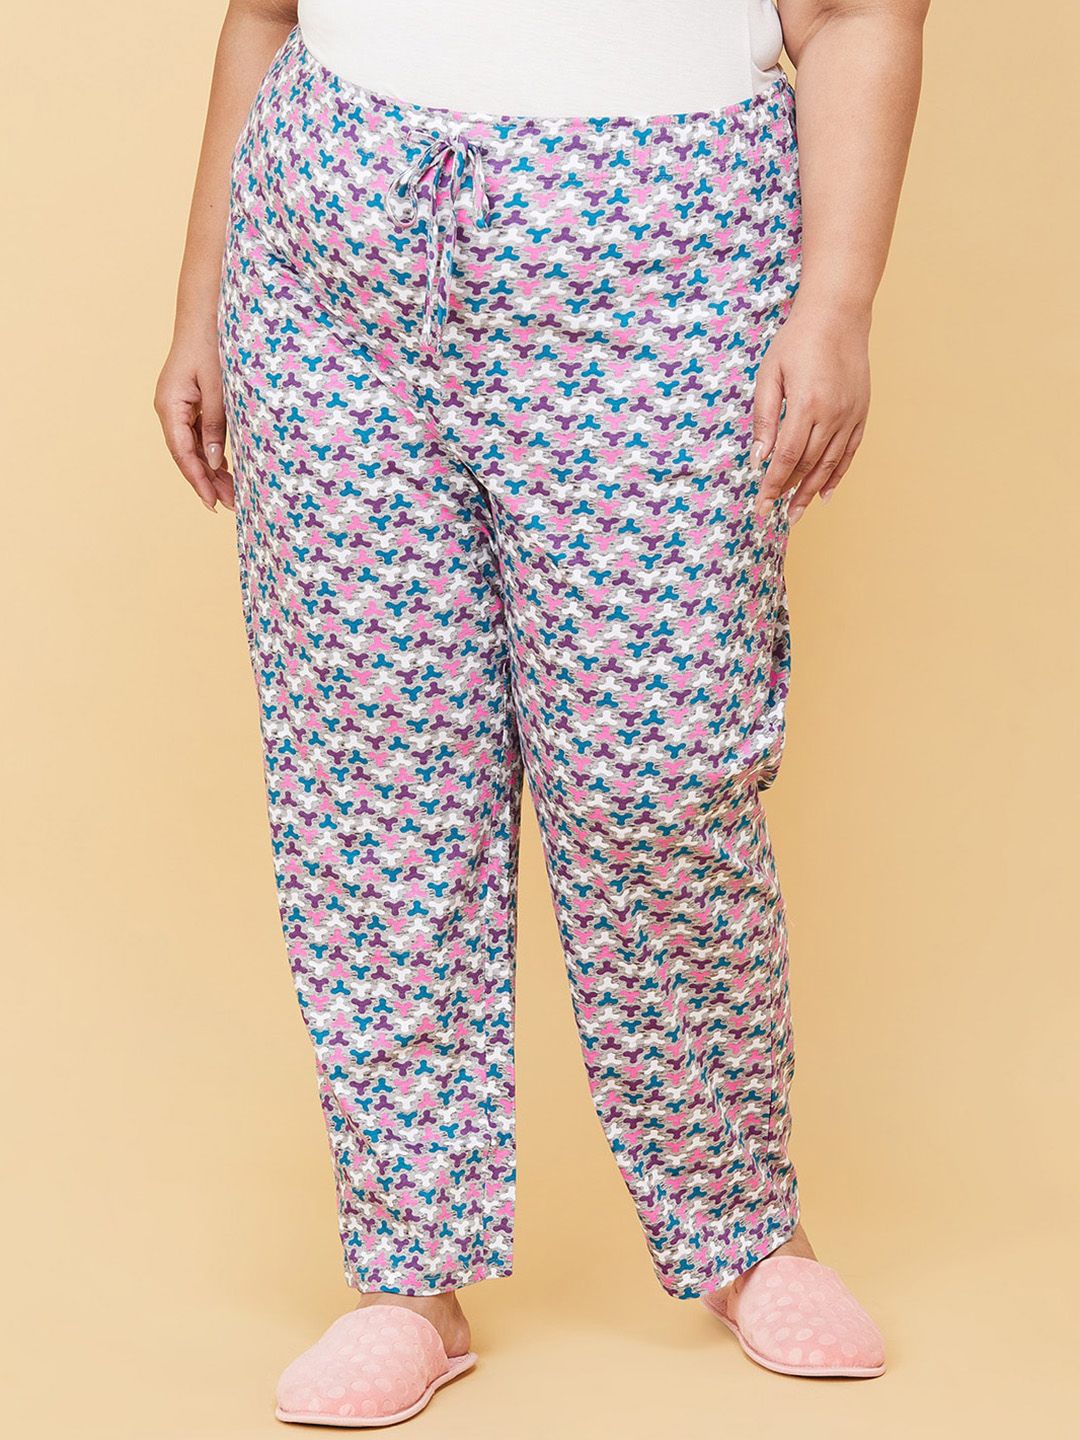 max Plus Size Women Multi-Colored Printed Lounge Pants Price in India